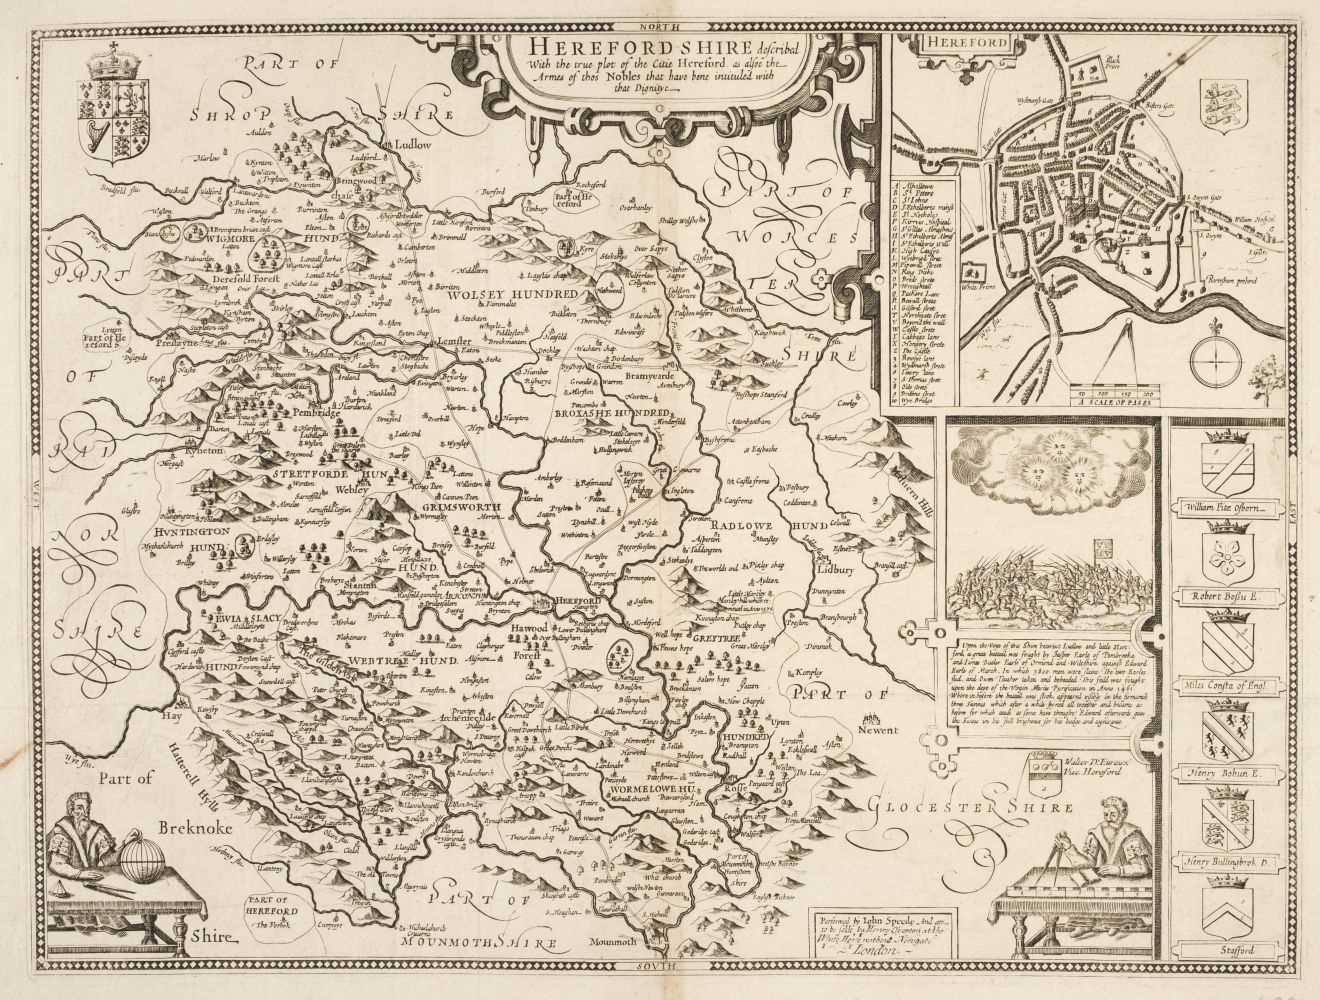 Lot 104 - Herefordshire. Speed (John), Hereford-Shire described..., Henry Overton, 1713 - 43